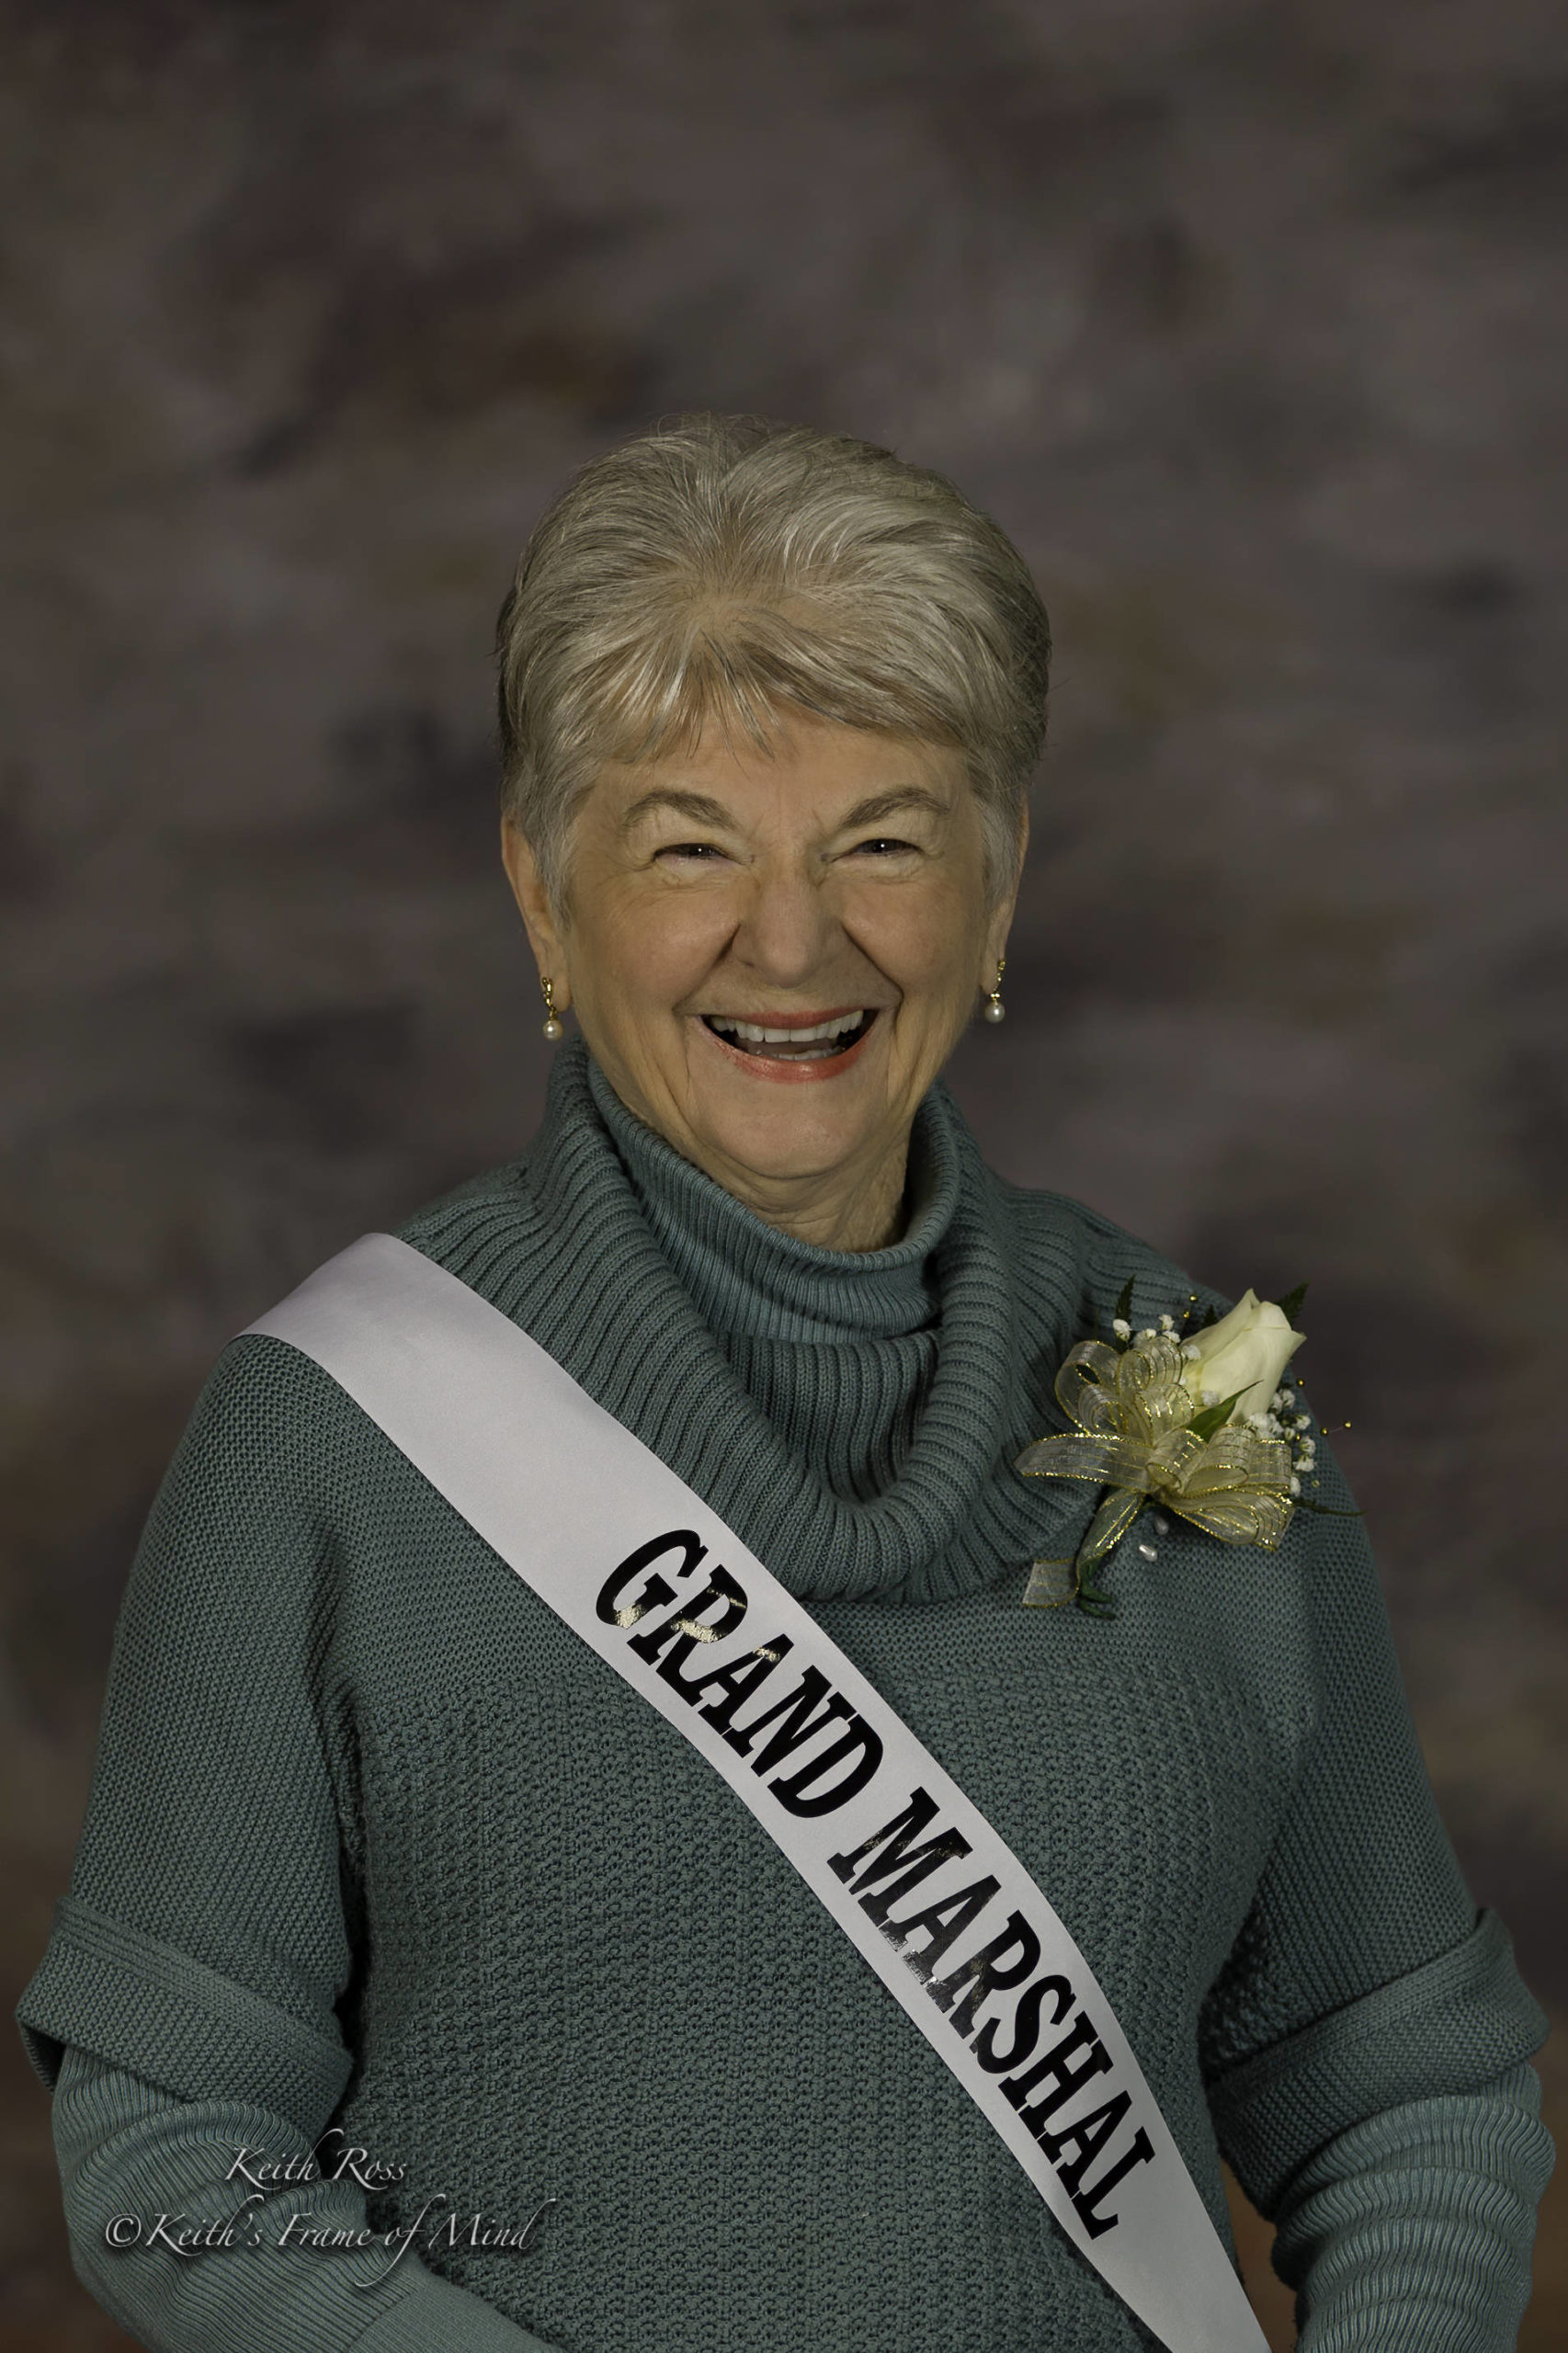 Amanda Beitzel, 2021 Sequim Irrigation Festival Grand Marshal. Photo by Keith Ross/Keith’s Frame of Mind